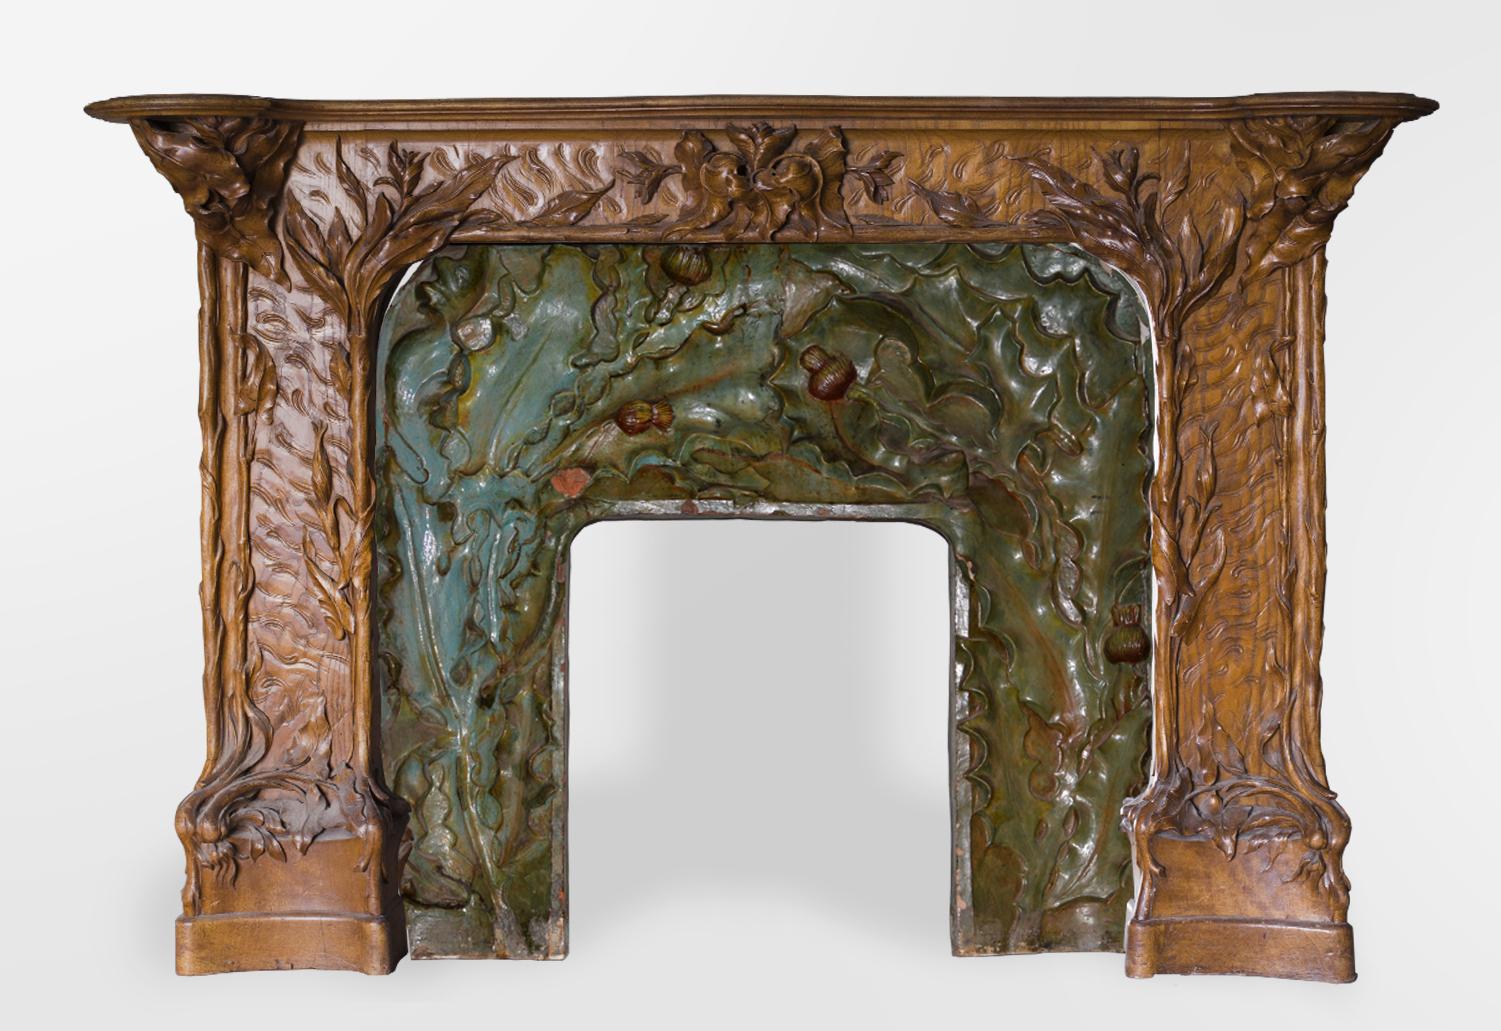 This exceptional Art Nouveau style pine and burr paneled room is beautifully carved and decorated with blue-green ceramics. Panels with elegant curved and sober lines are covering the bottom of the walls and harmonize the room to its center; a